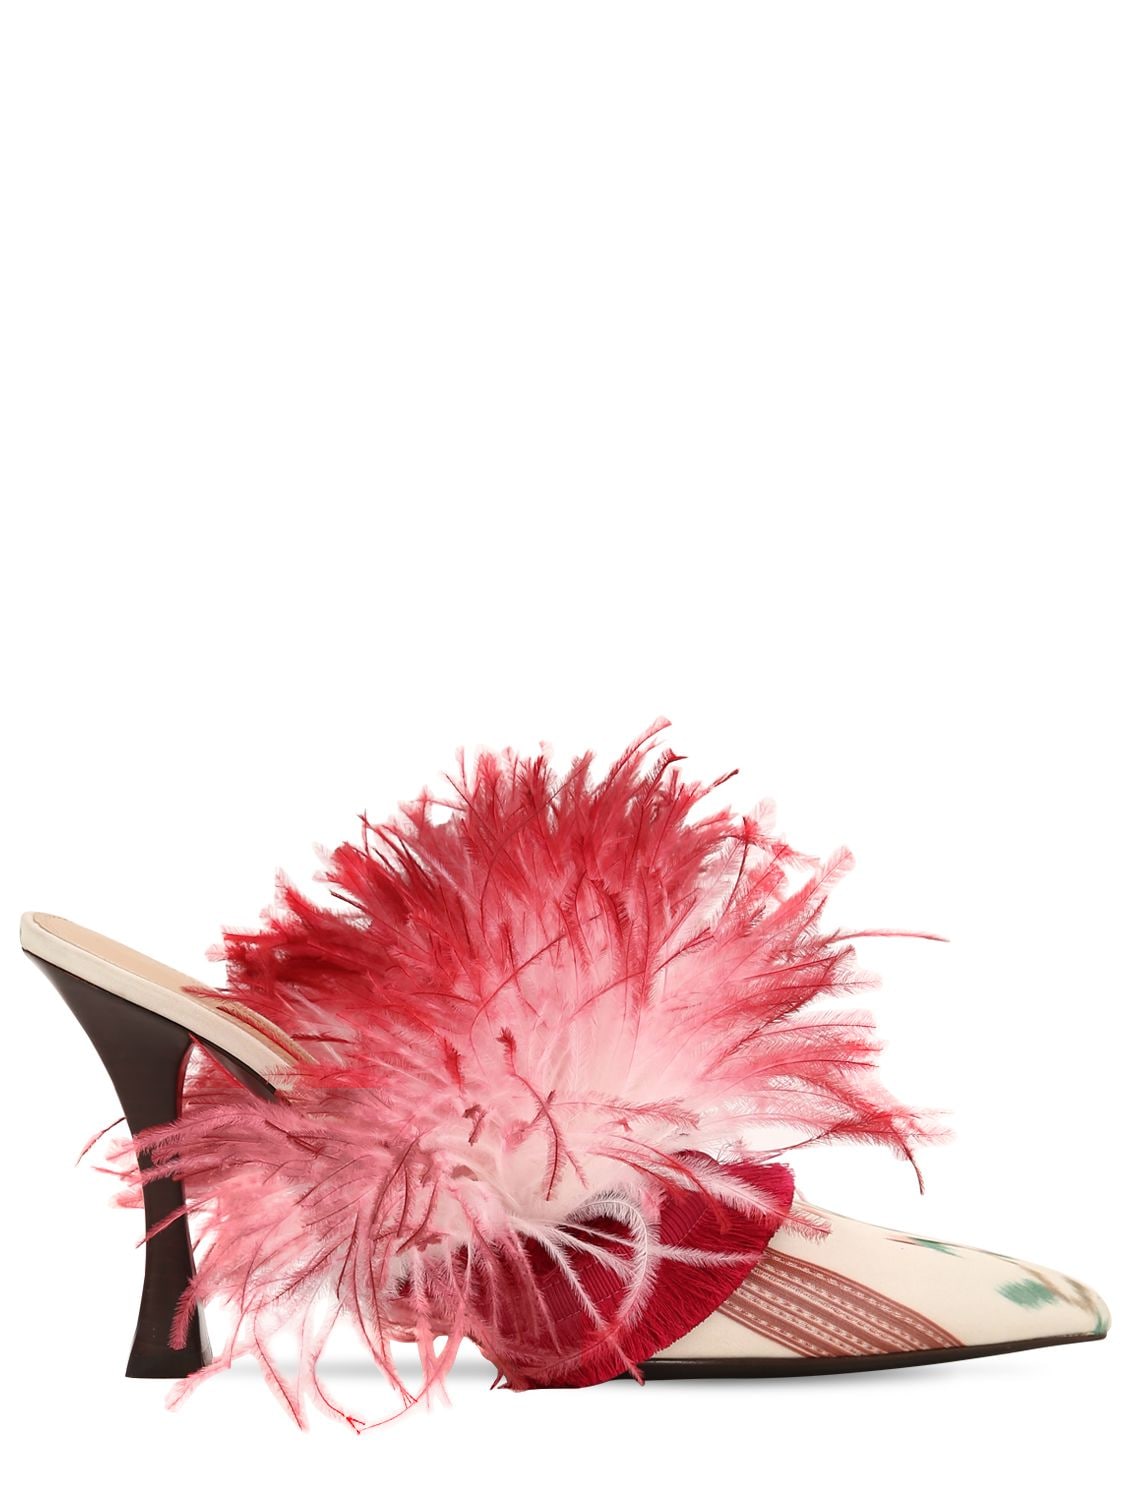 Mm Feather & Satin Mules - TABITHA SIMMONS FOR BROCK COLLECTION - Modalova